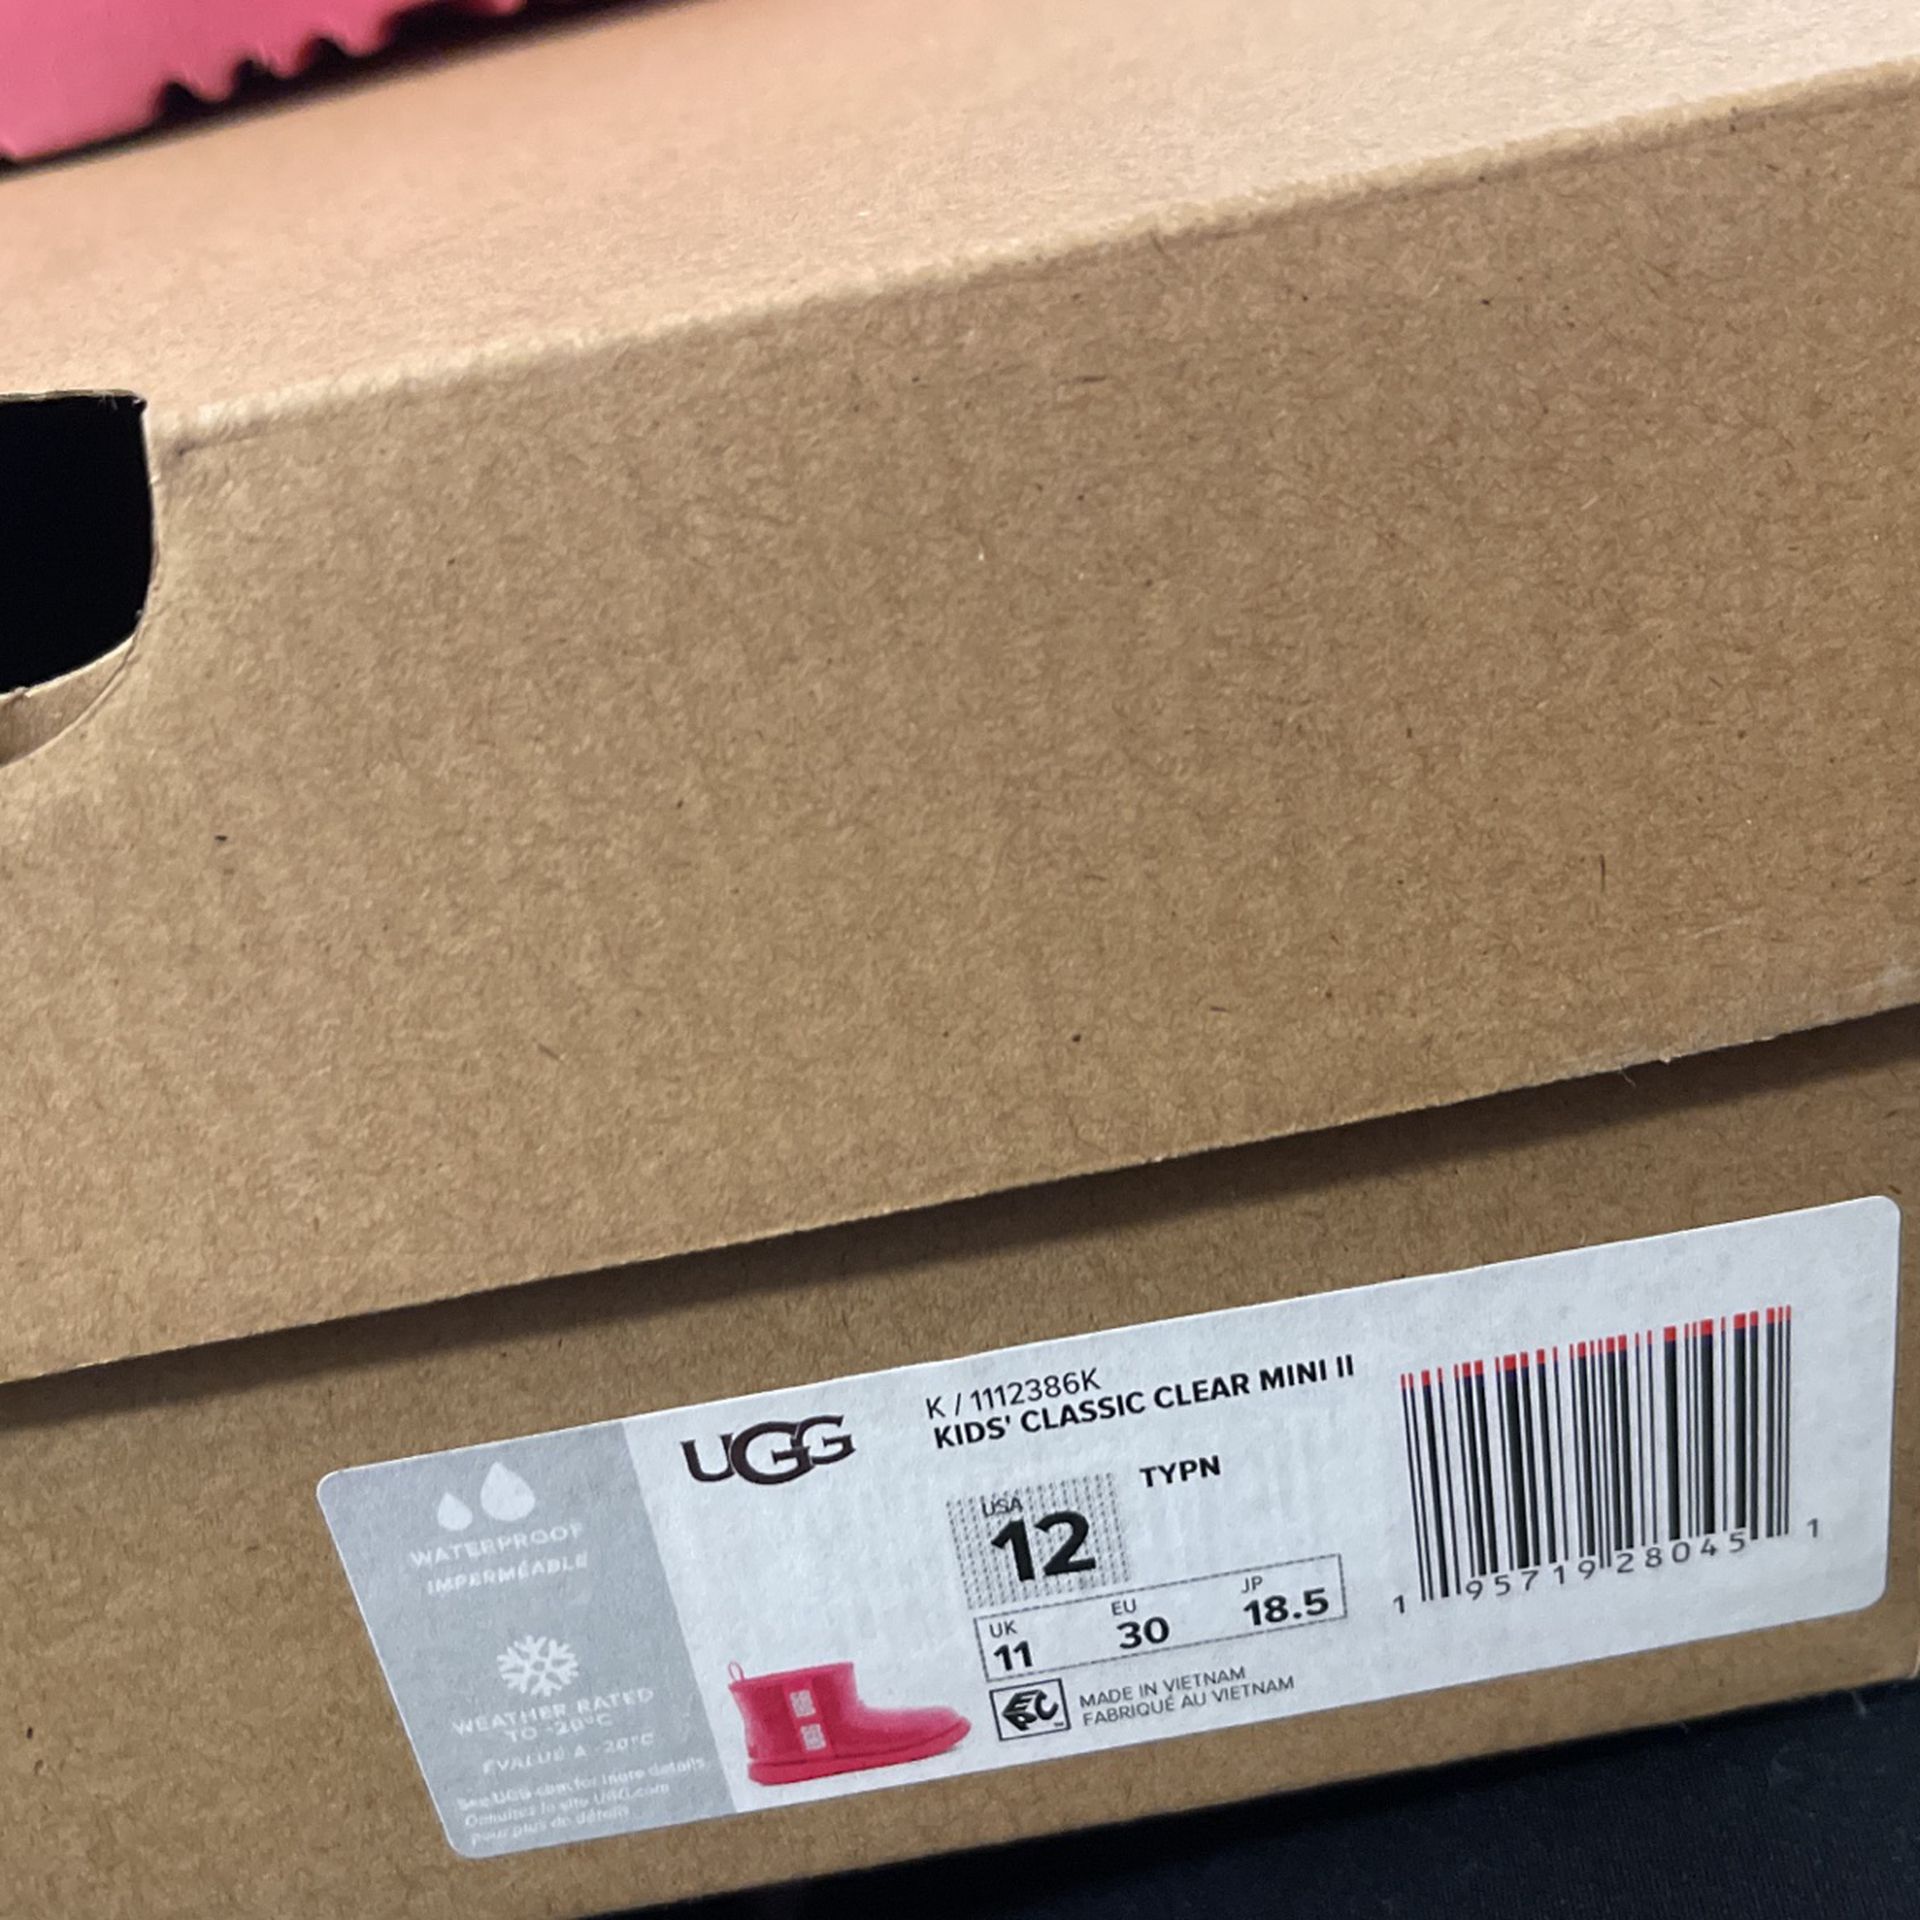 UGGS PINK SIZE 12C